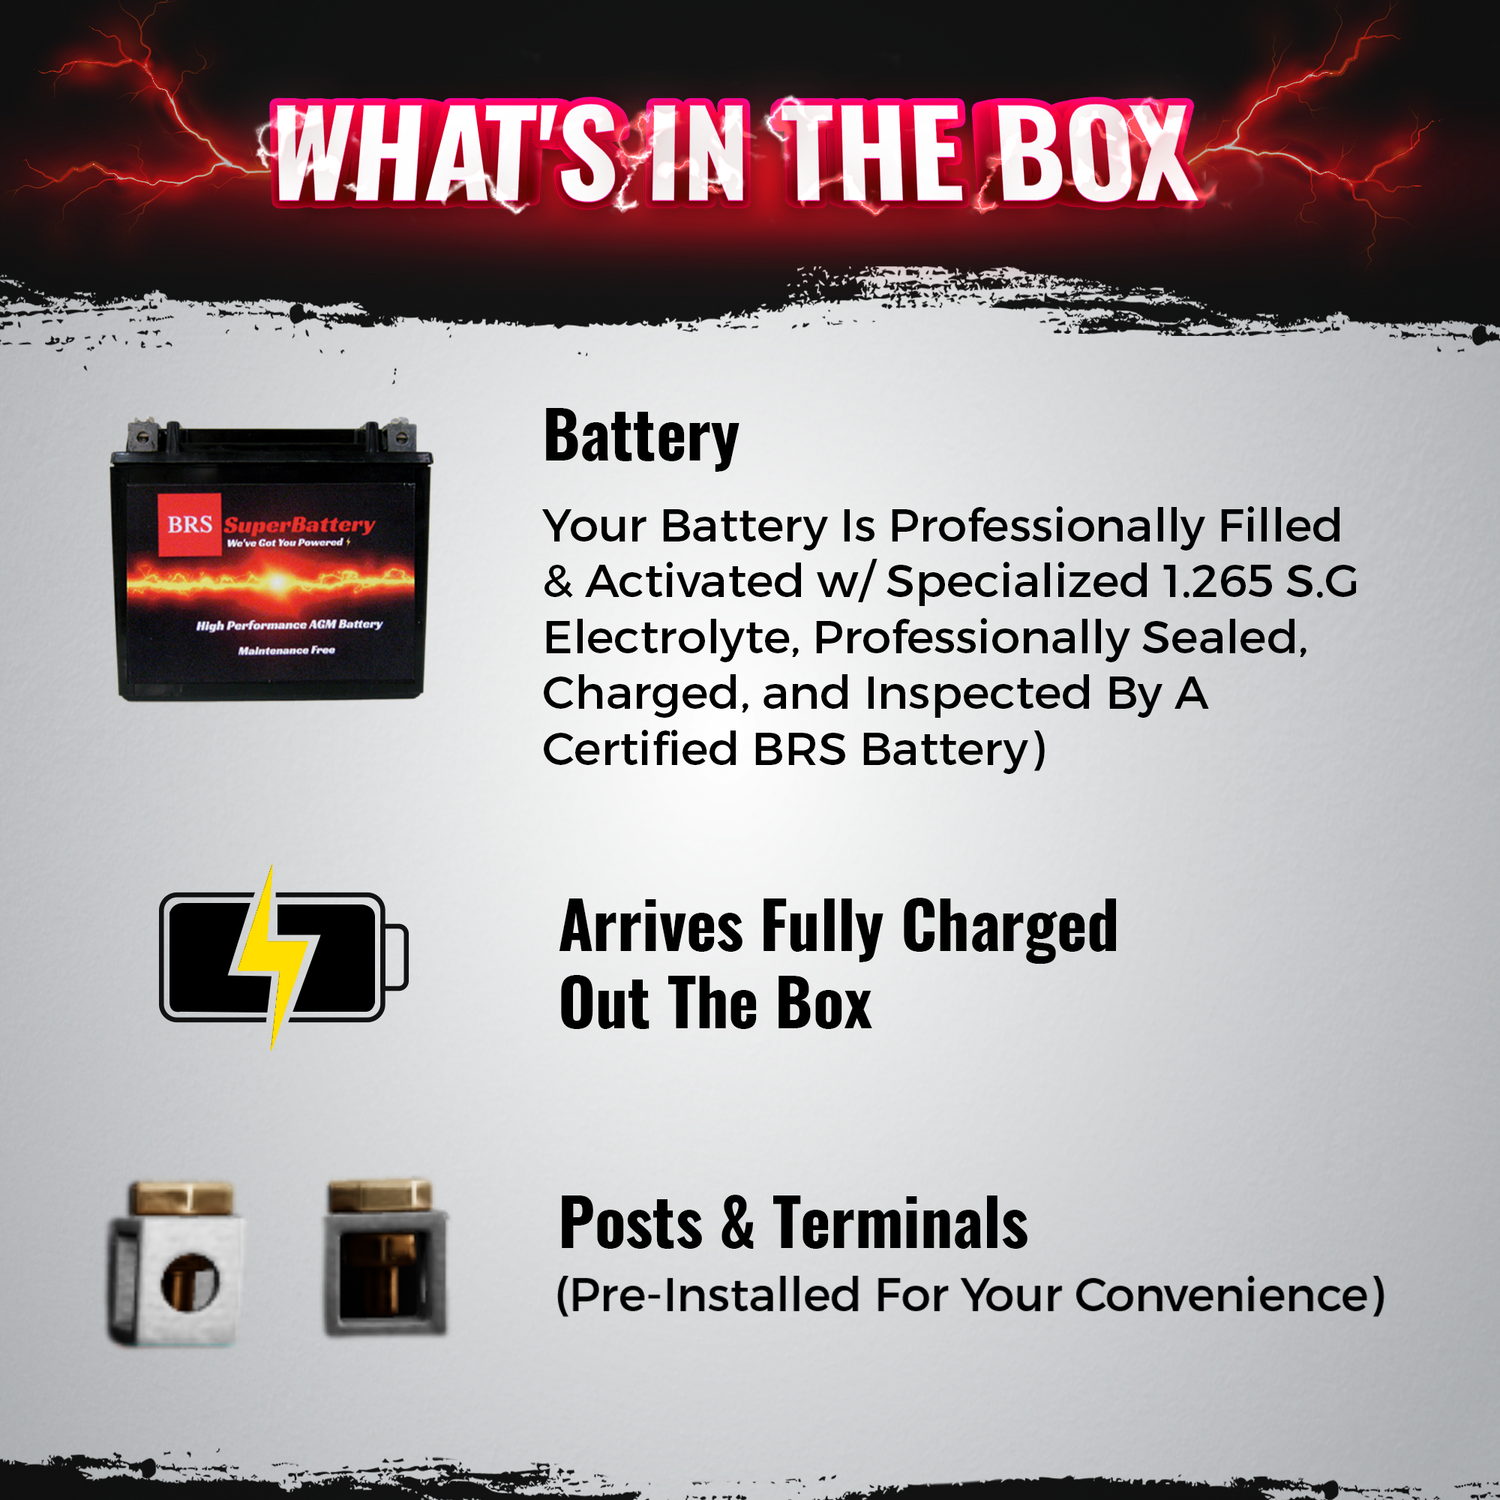 BRS12-BS 12v High Performance Sealed AGM PowerSport 2 Year Battery - BRS Super Battery